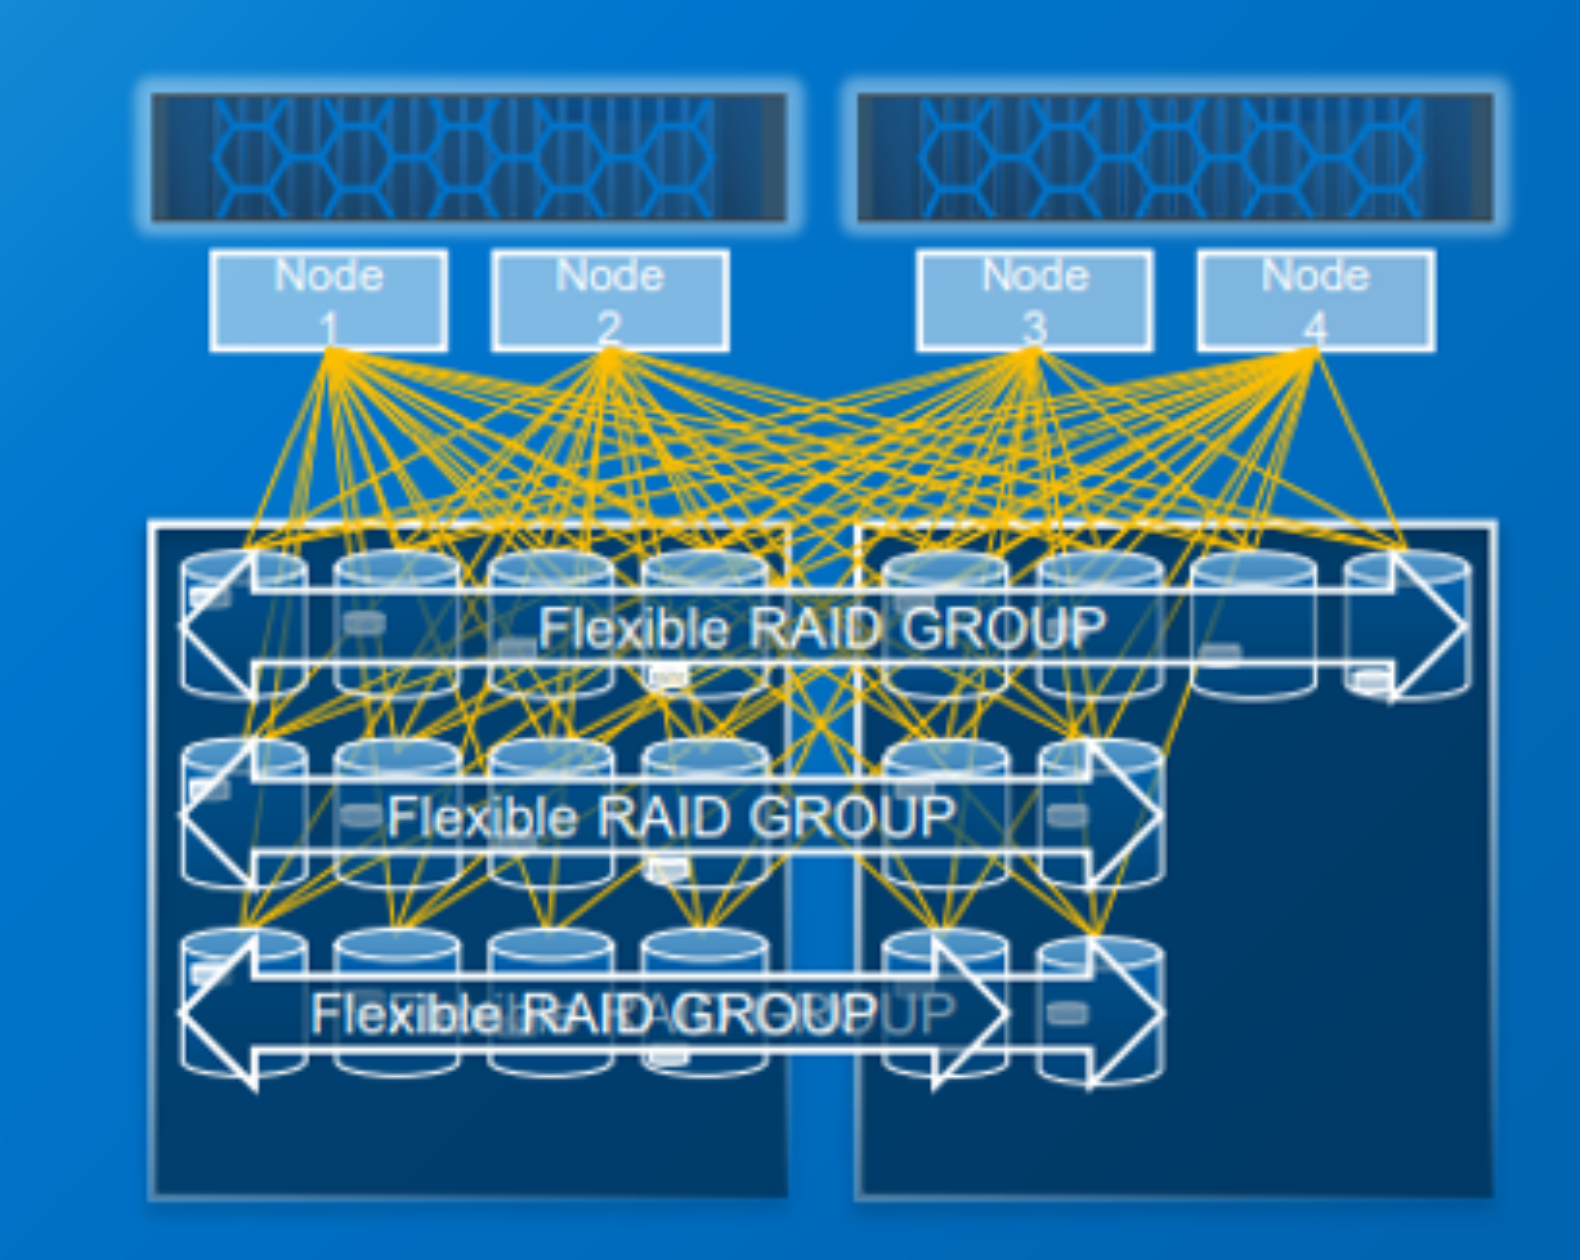 High level overview diagram of Flexible RAID architecture